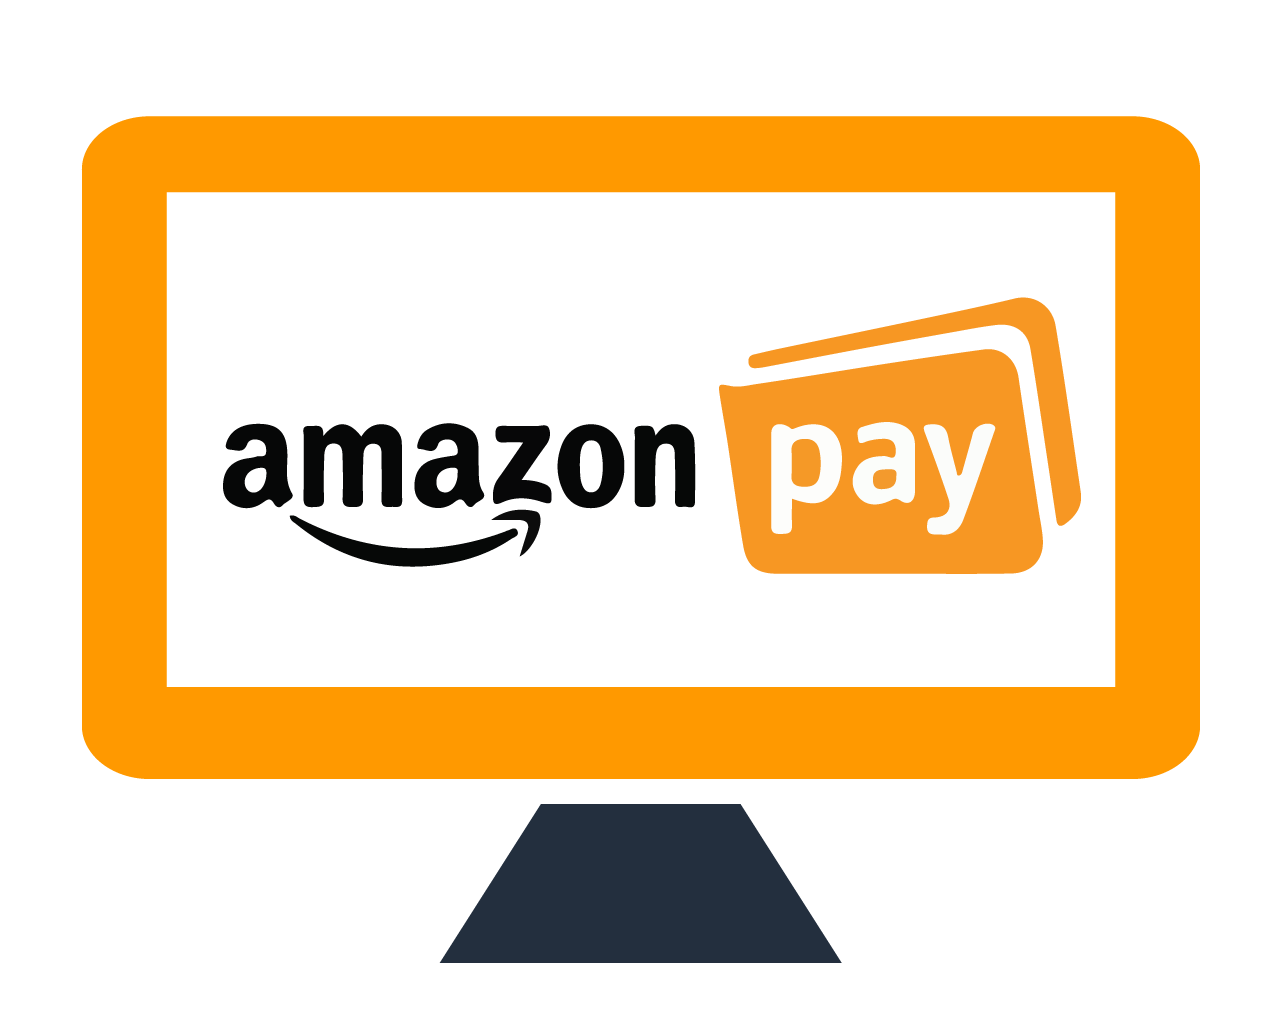 Adyen Amazon Pay support announced - will eBay Payments support? - ChannelX